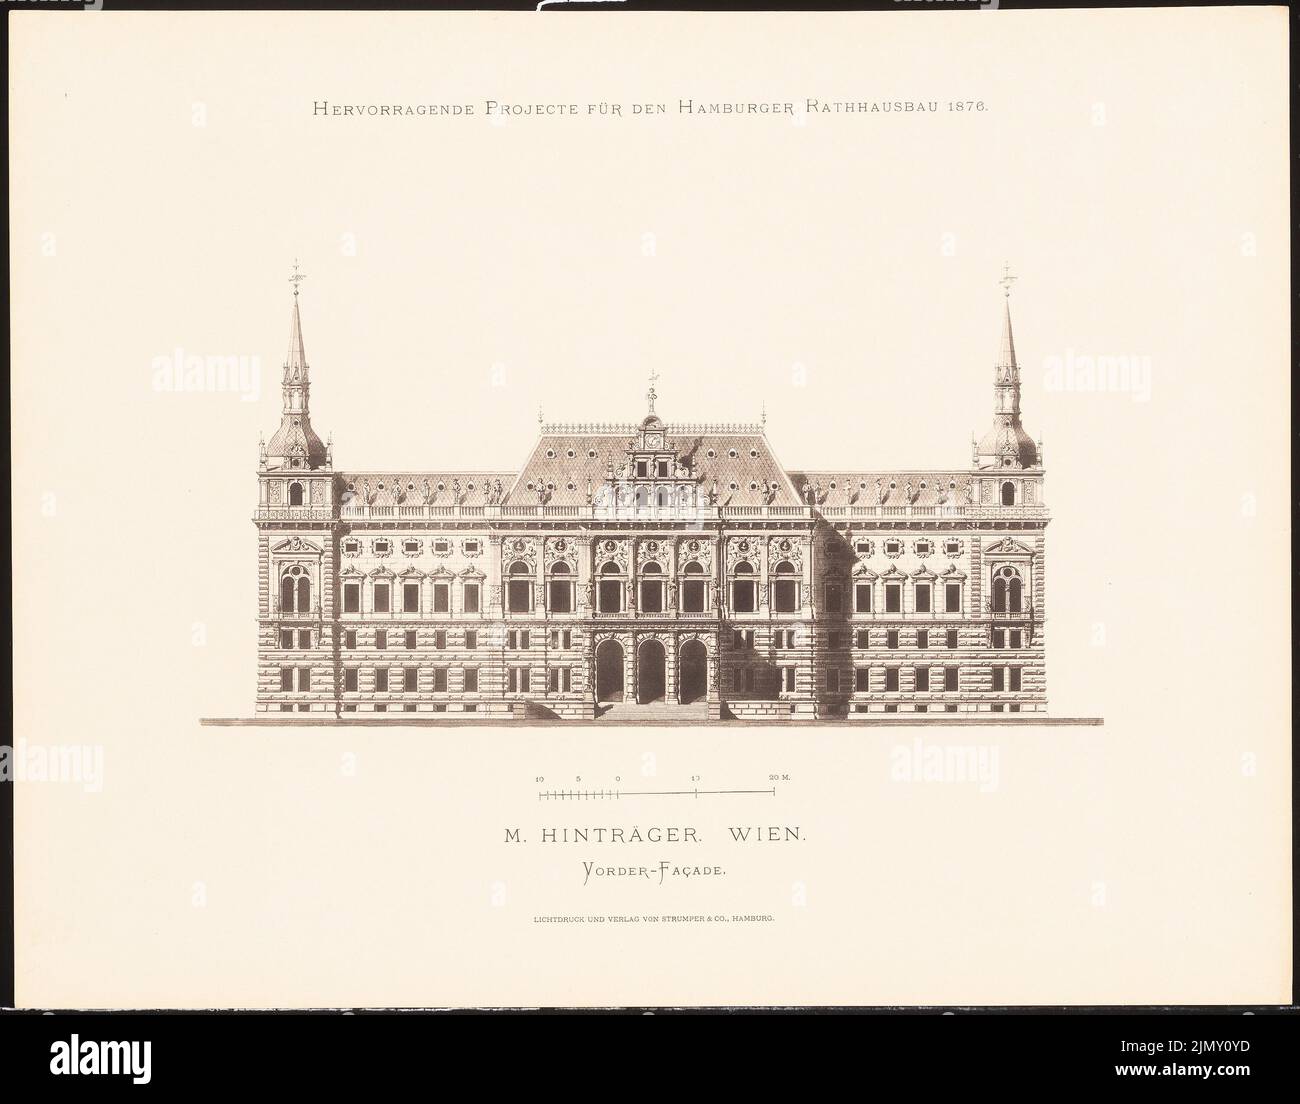 Hinbär M., excellent projects for the Hamburg town hall construction in 1876 (1876-1876): View from the front. Light pressure on paper, 35.2 x 45.1 cm (including scan edges) Stock Photo